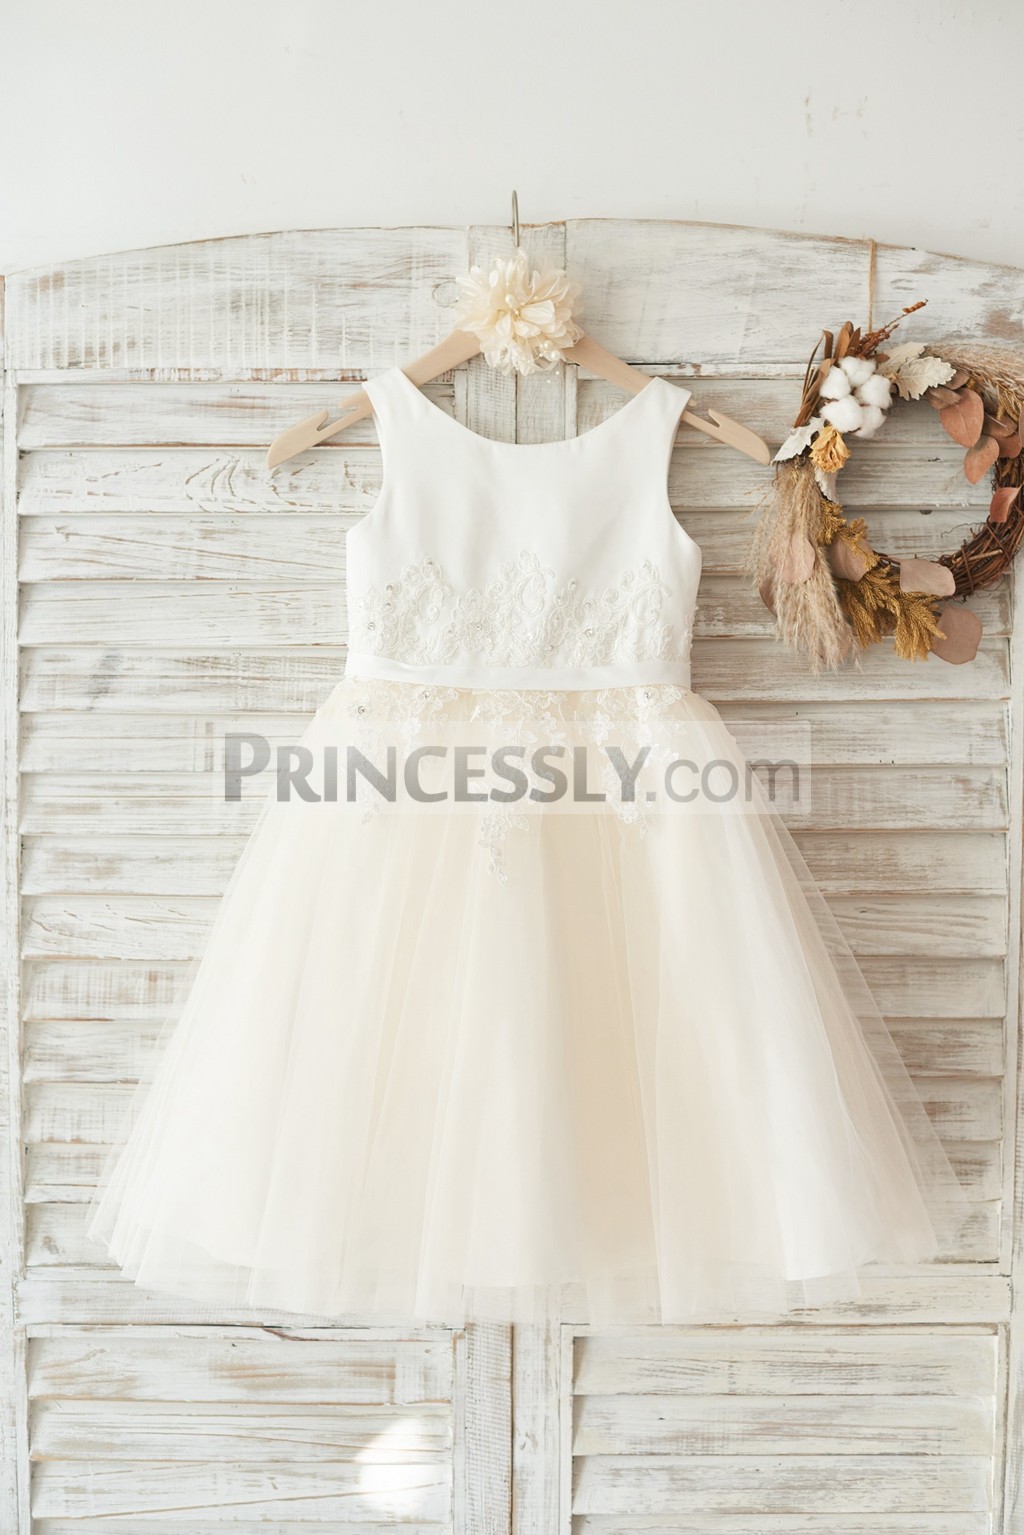 Princessly.com-K1003451-Ivory Satin Champagne Tulle Wedding Flower Girl Dress with Ivory Beaded Lace-31